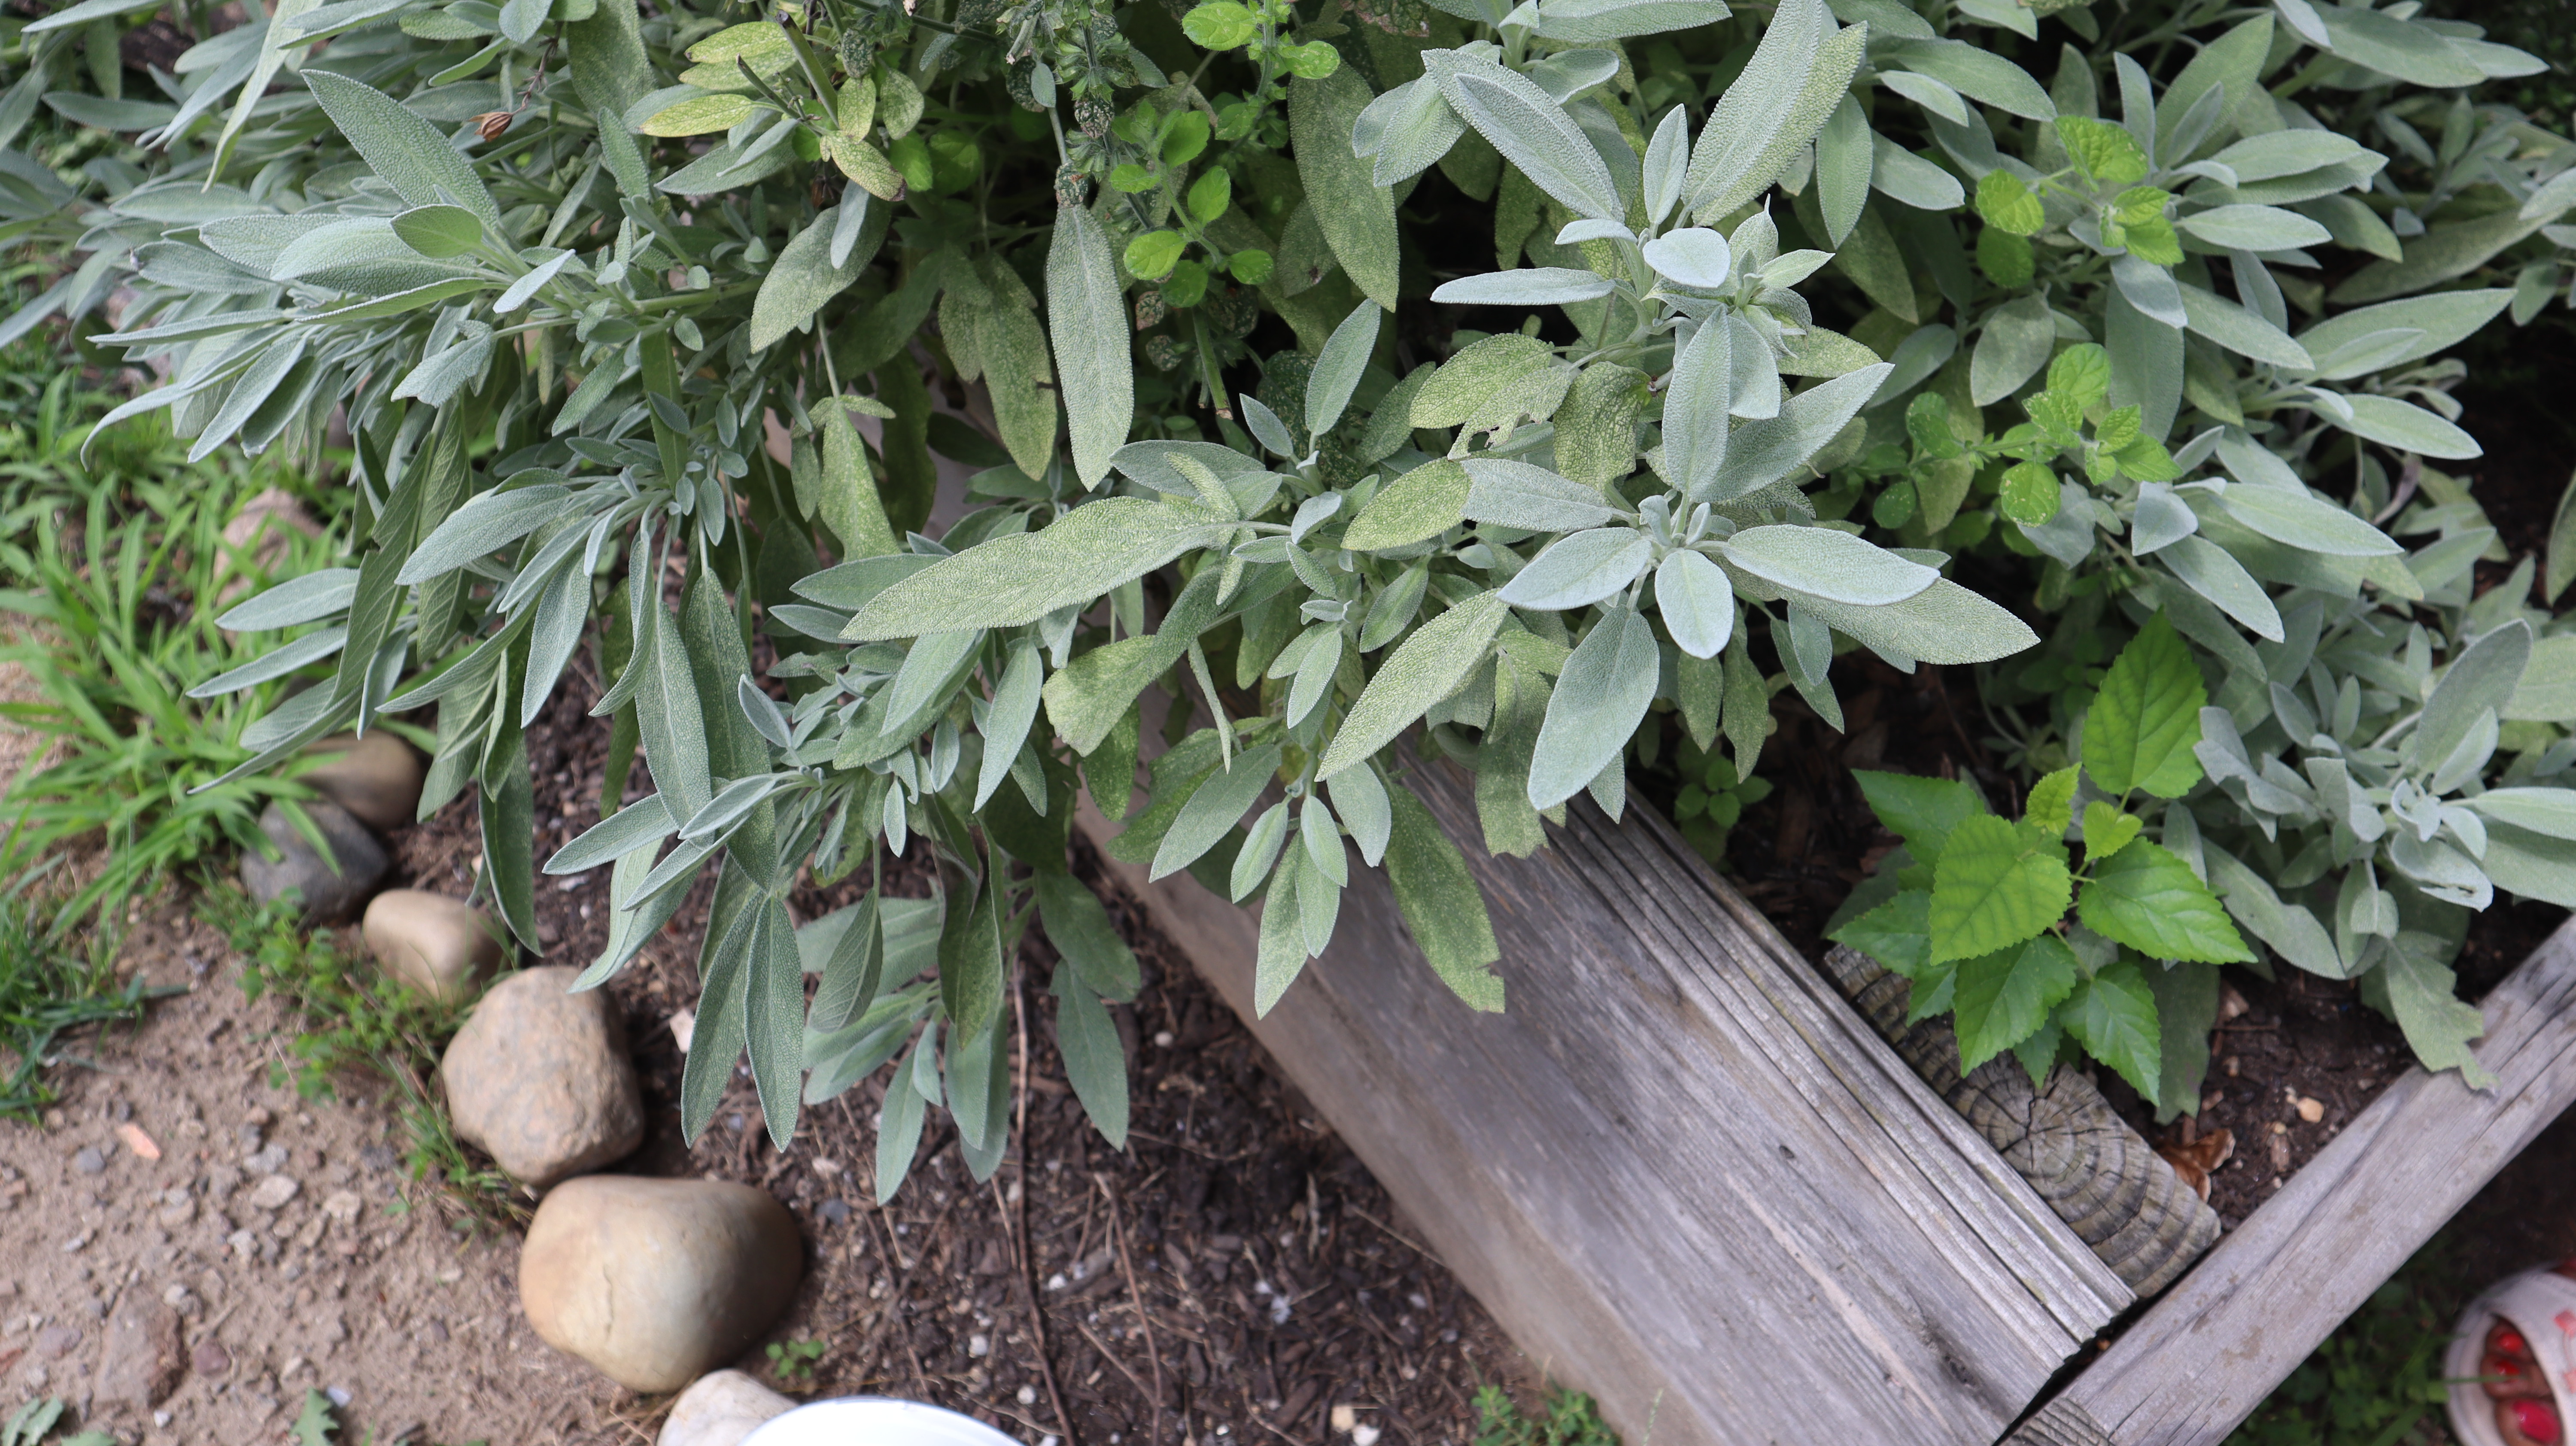 sage and other herbs grow in a raised bed